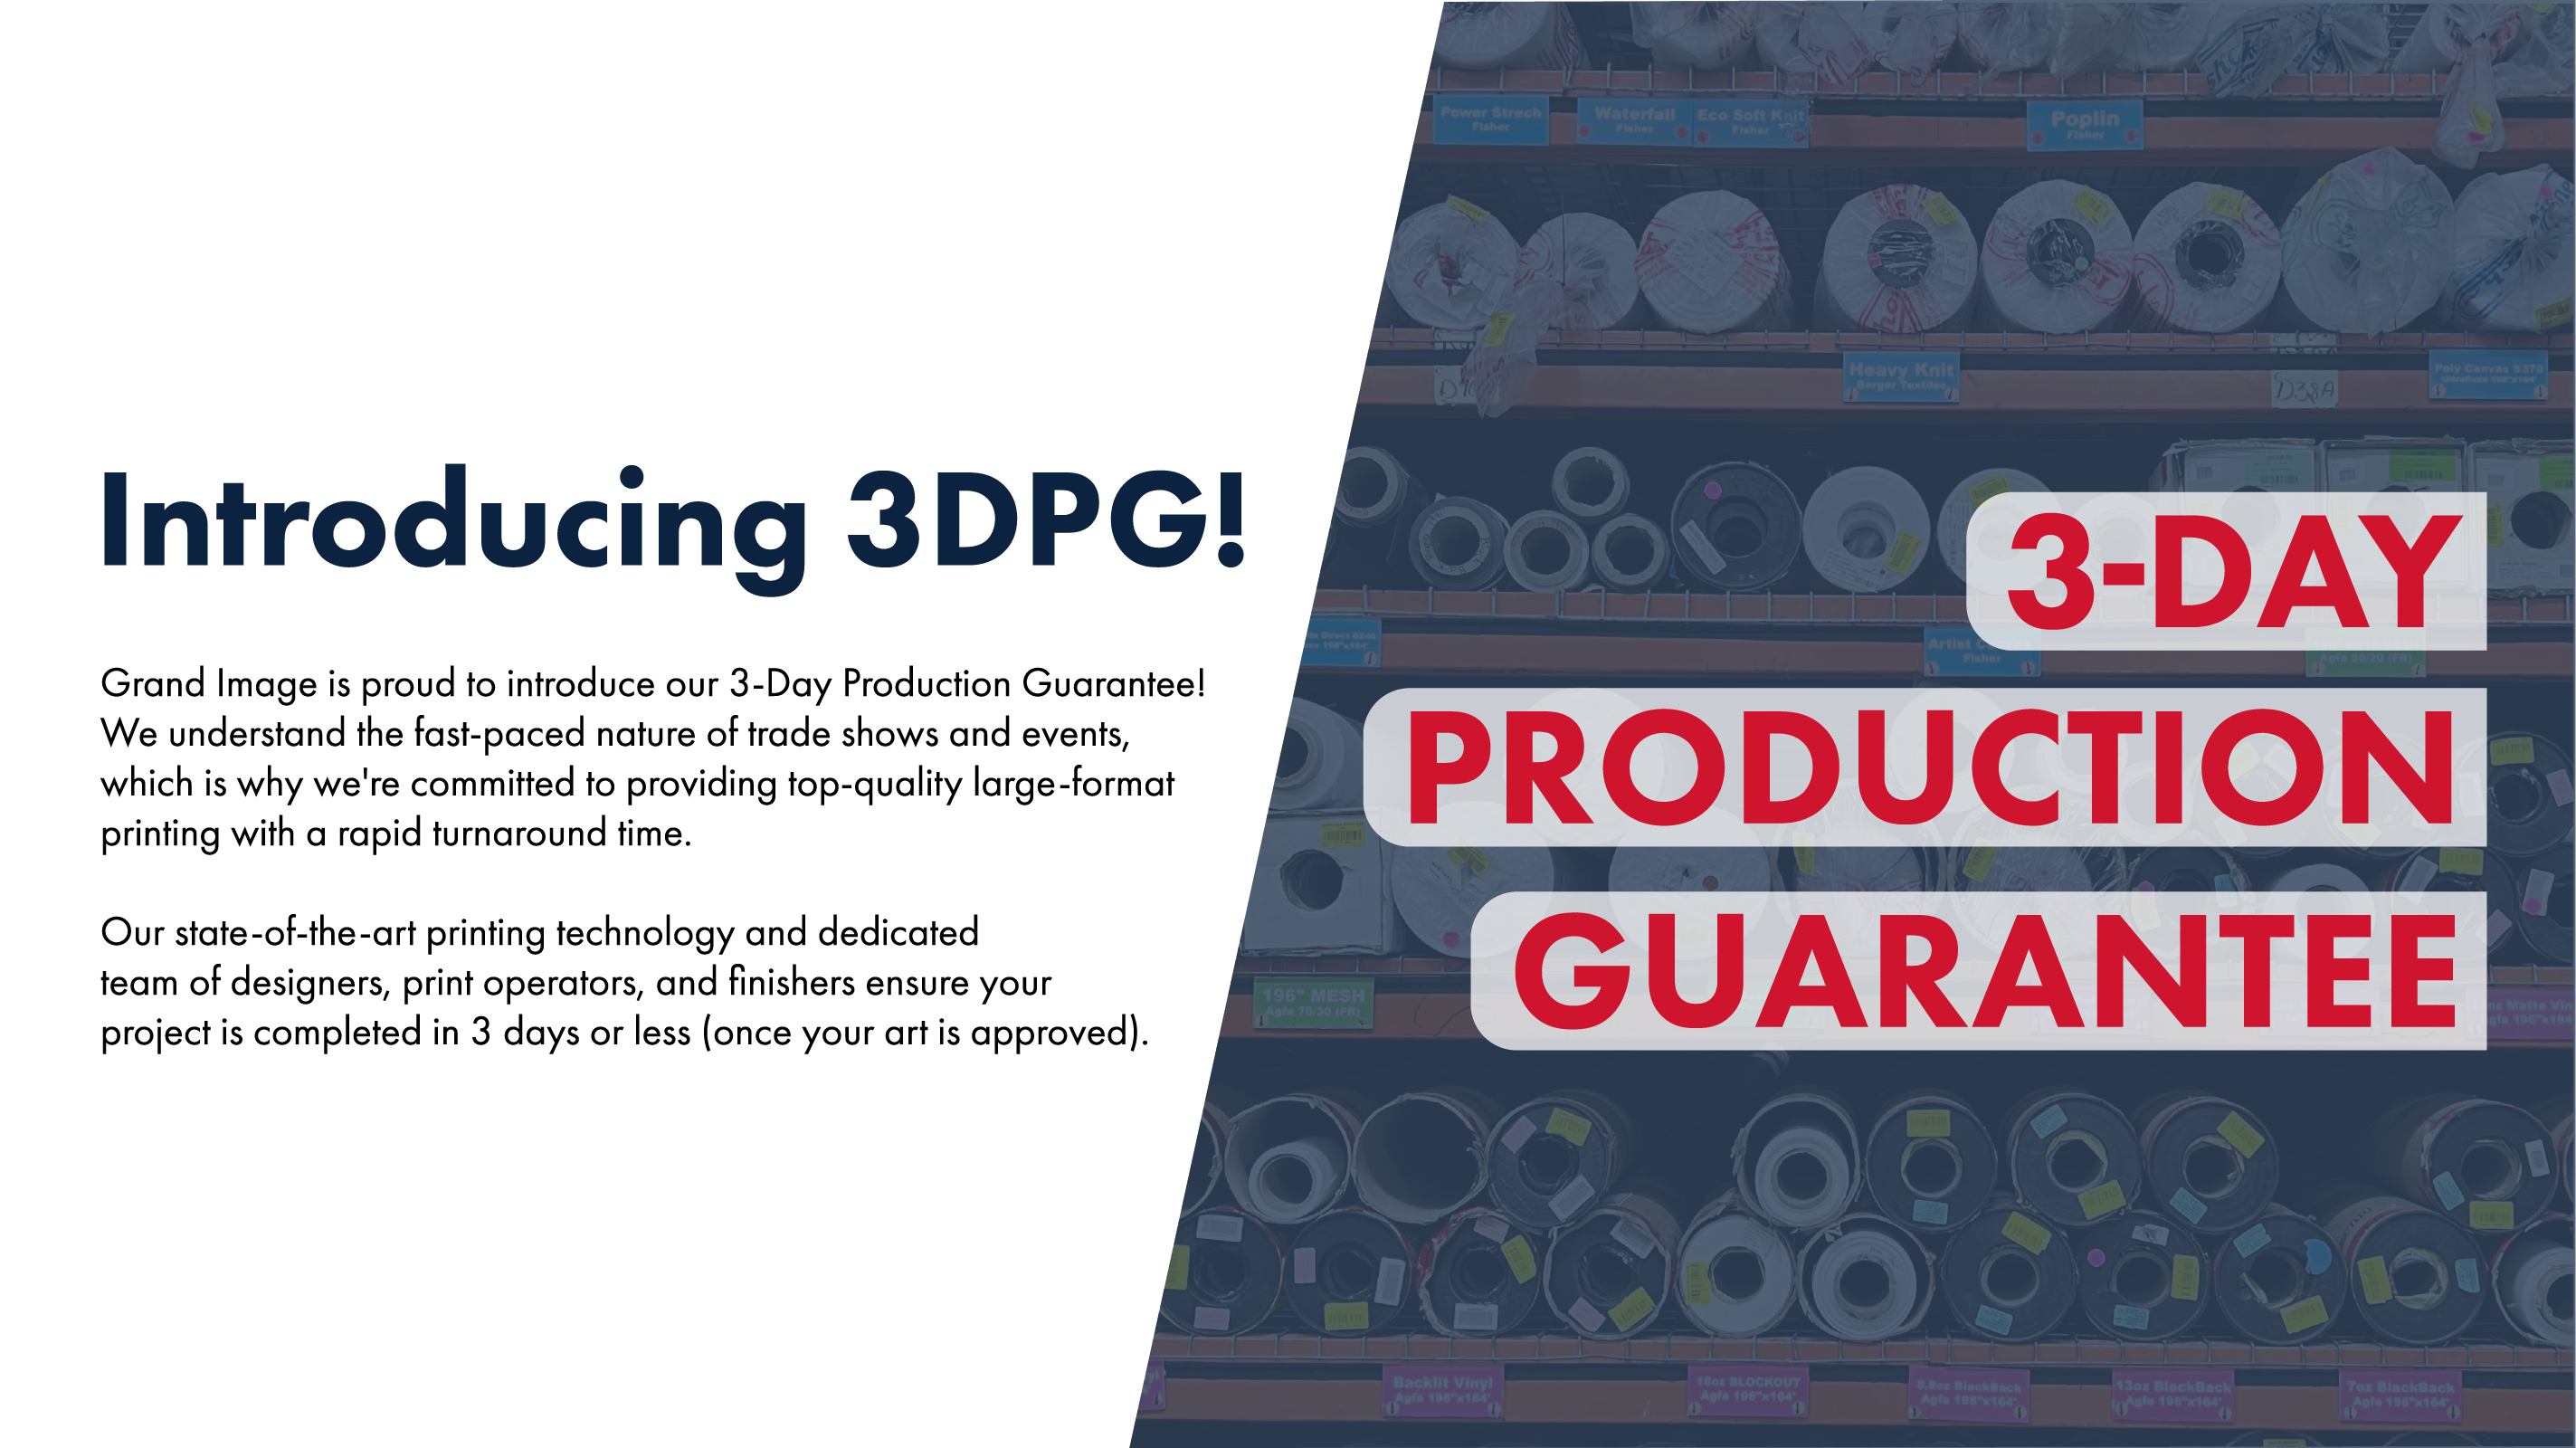 Introducing 3DPG! Grand Image is proud to introduce our 3-Day Production Guarantee! We understand the fast-paced nature of trade shows and events, which is why we're committed to providing top-quality large-format printing with a rapid turnaround time. Our state-of-the-art printing technology and dedicated team of designers, print operators, and finishers ensure your project is completed in 3 days or less (once your art is approved).